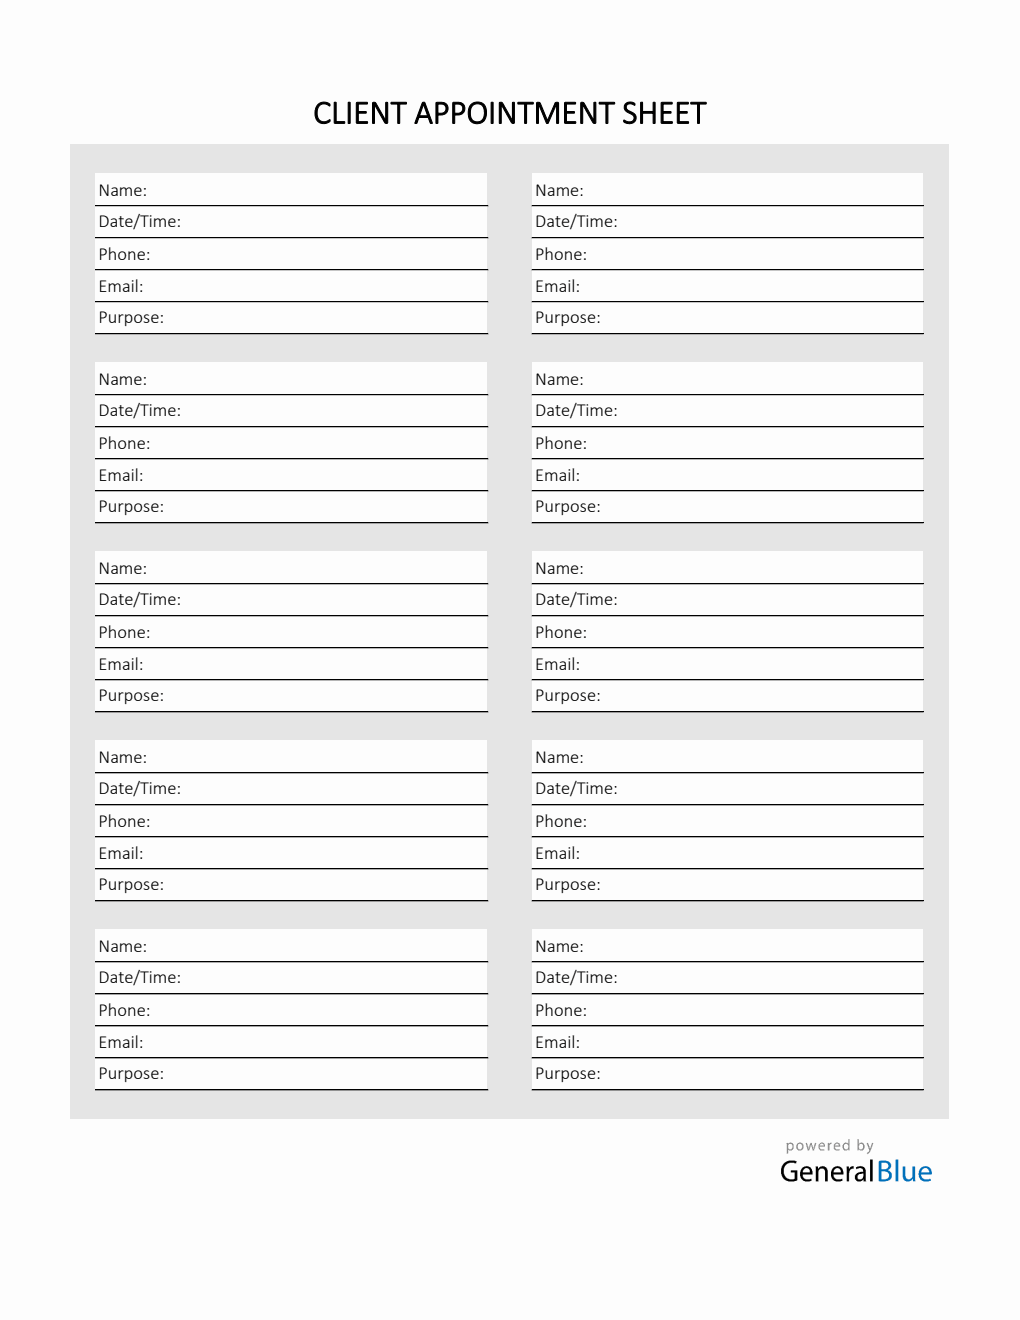 Appointment Sheet Template in Excel